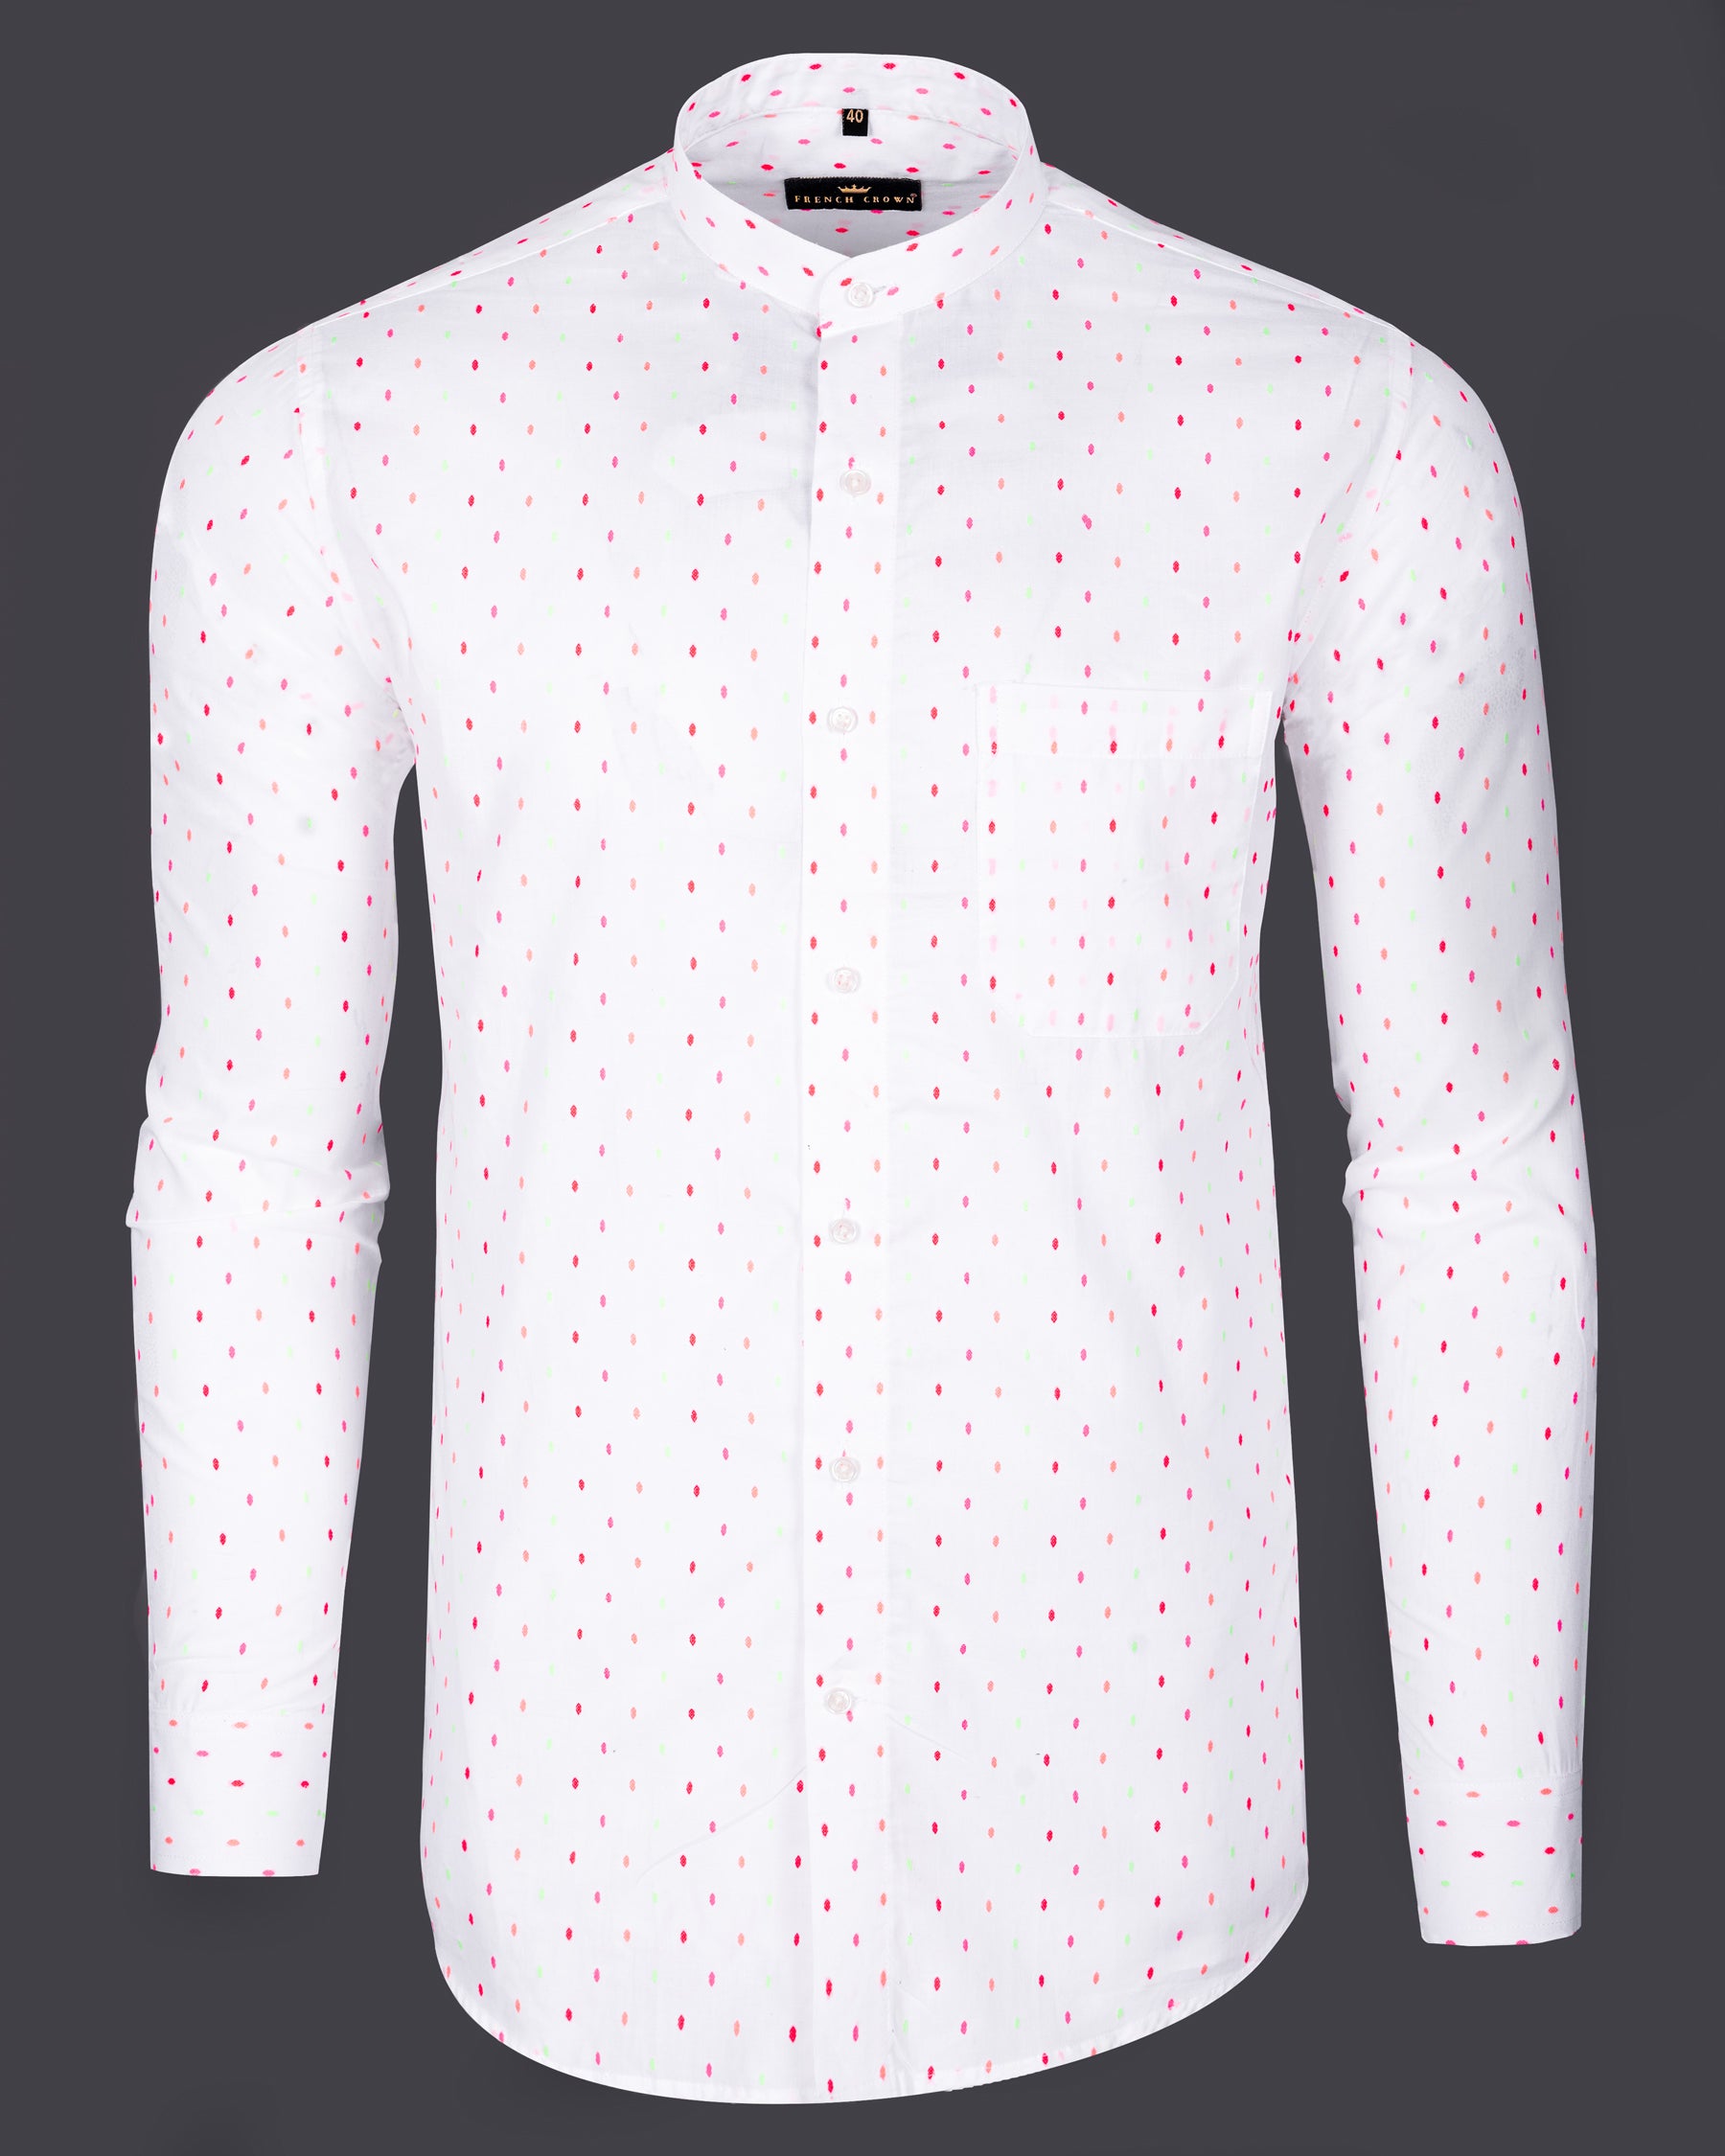 Bright White with fluorescent Dobby Textured Premium Giza Cotton Shirt 5400-M-38, 5400-M-H-38, 5400-M-39, 5400-M-H-39, 5400-M-40, 5400-M-H-40, 5400-M-42, 5400-M-H-42, 5400-M-44, 5400-M-H-44, 5400-M-46, 5400-M-H-46, 5400-M-48, 5400-M-H-48, 5400-M-50, 5400-M-H-50, 5400-M-52, 5400-M-H-52